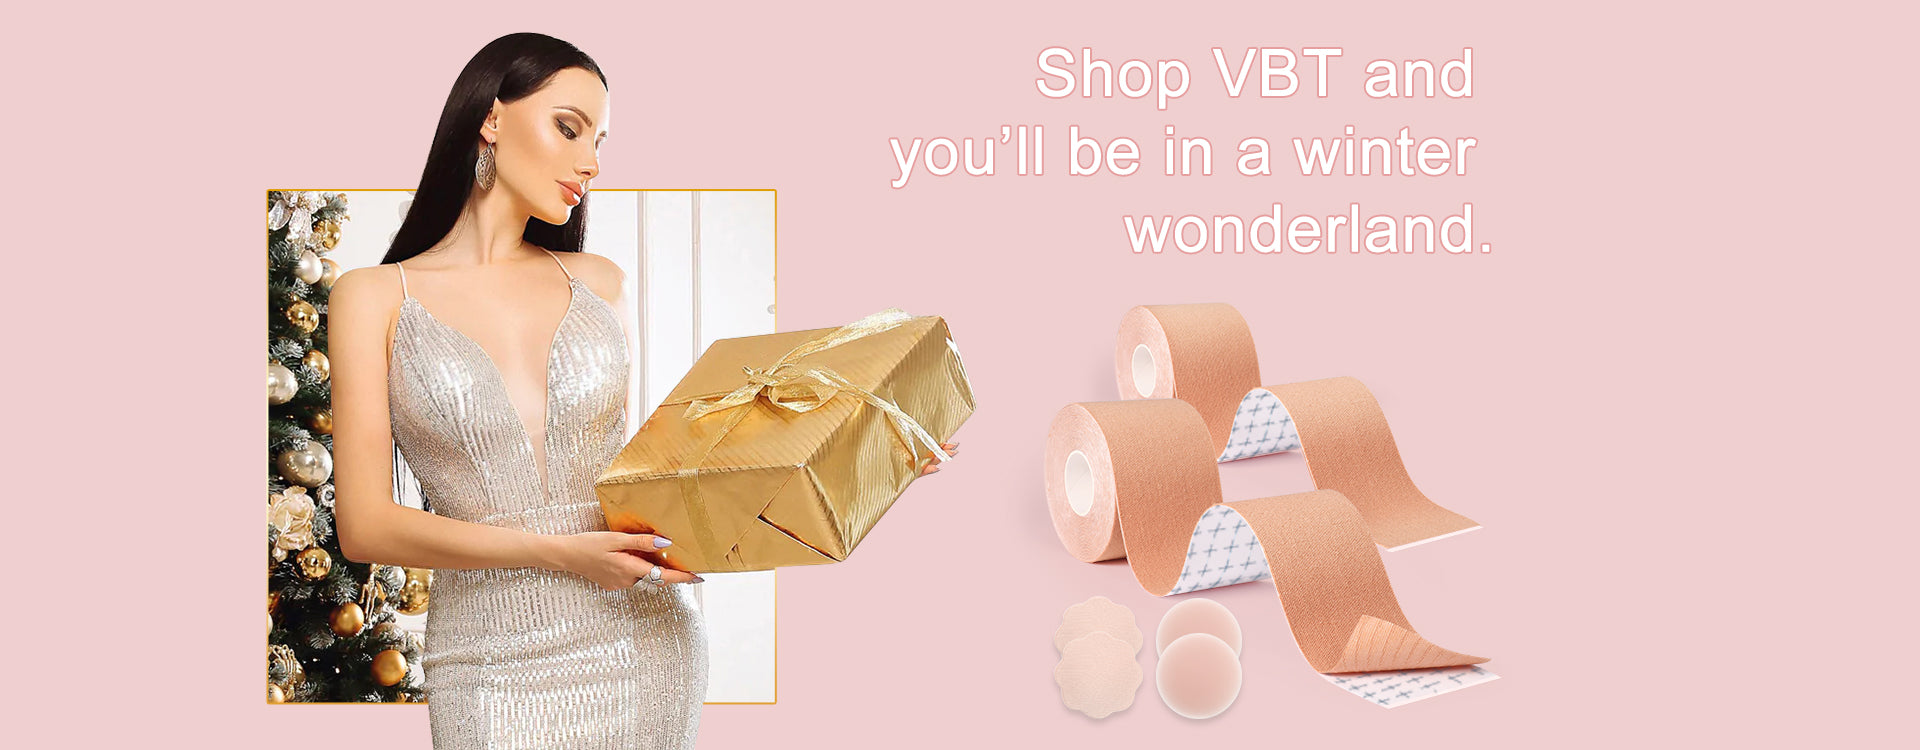 VBT 2 Pack Boob Tape - Breast Lift Tape, Body Tape for Breast Lift w 2 Pcs  Silicone Breast Reusable Adhesive Bra& 2 Pcs Fabric Nipple Covers, Bob Tape  for Large Breasts